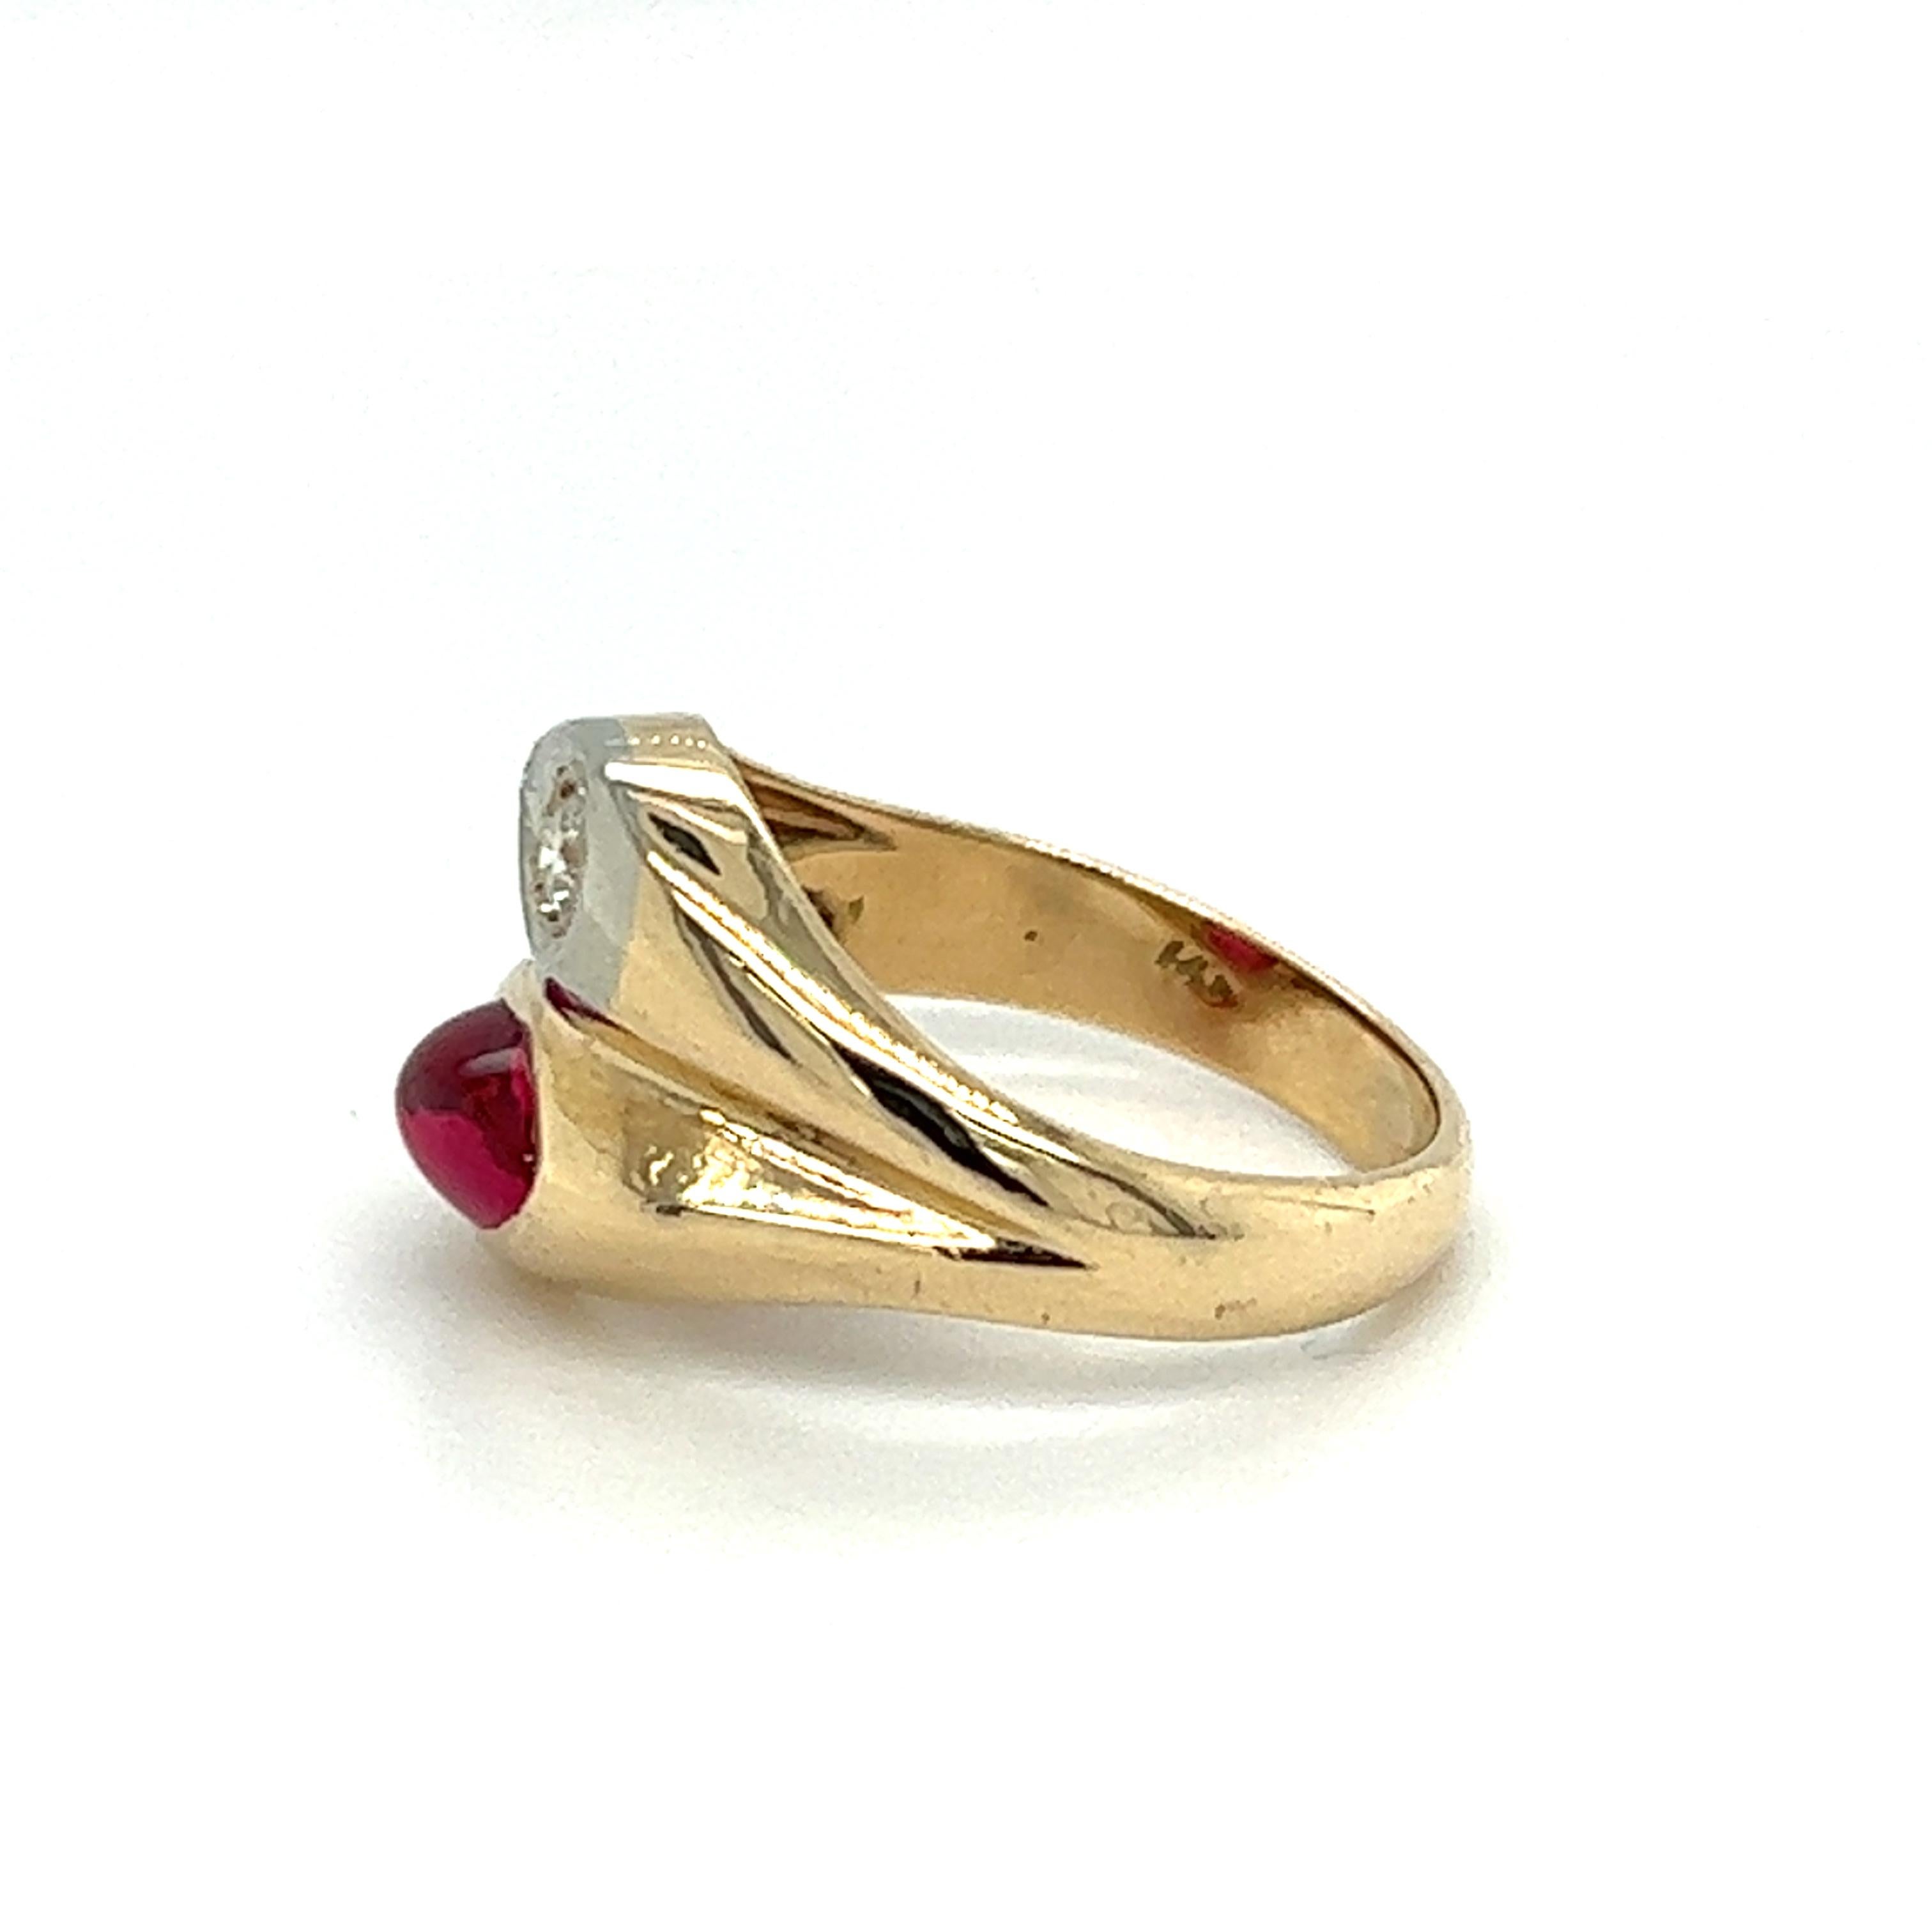 One 14-karat yellow and white gold yin-yang style ring featuring a pear-shaped cabochon created ruby measuring 7mm x 5 mm, and one natural round brilliant cut diamond, approximately 0.06-carat total weight with I/J color and SI1 clarity.  